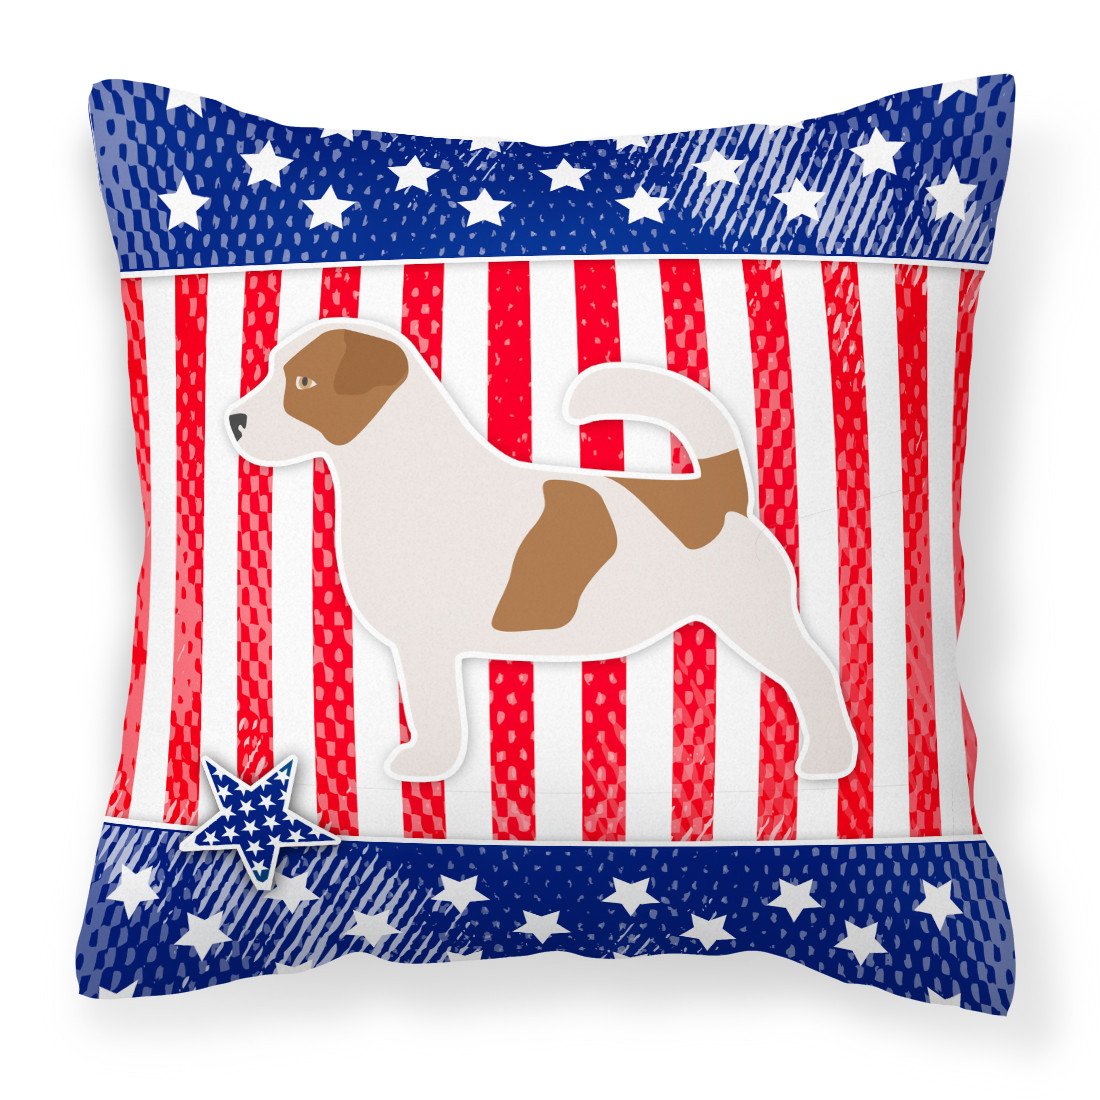 USA Patriotic Jack Russell Terrier Fabric Decorative Pillow BB3307PW1818 by Caroline's Treasures